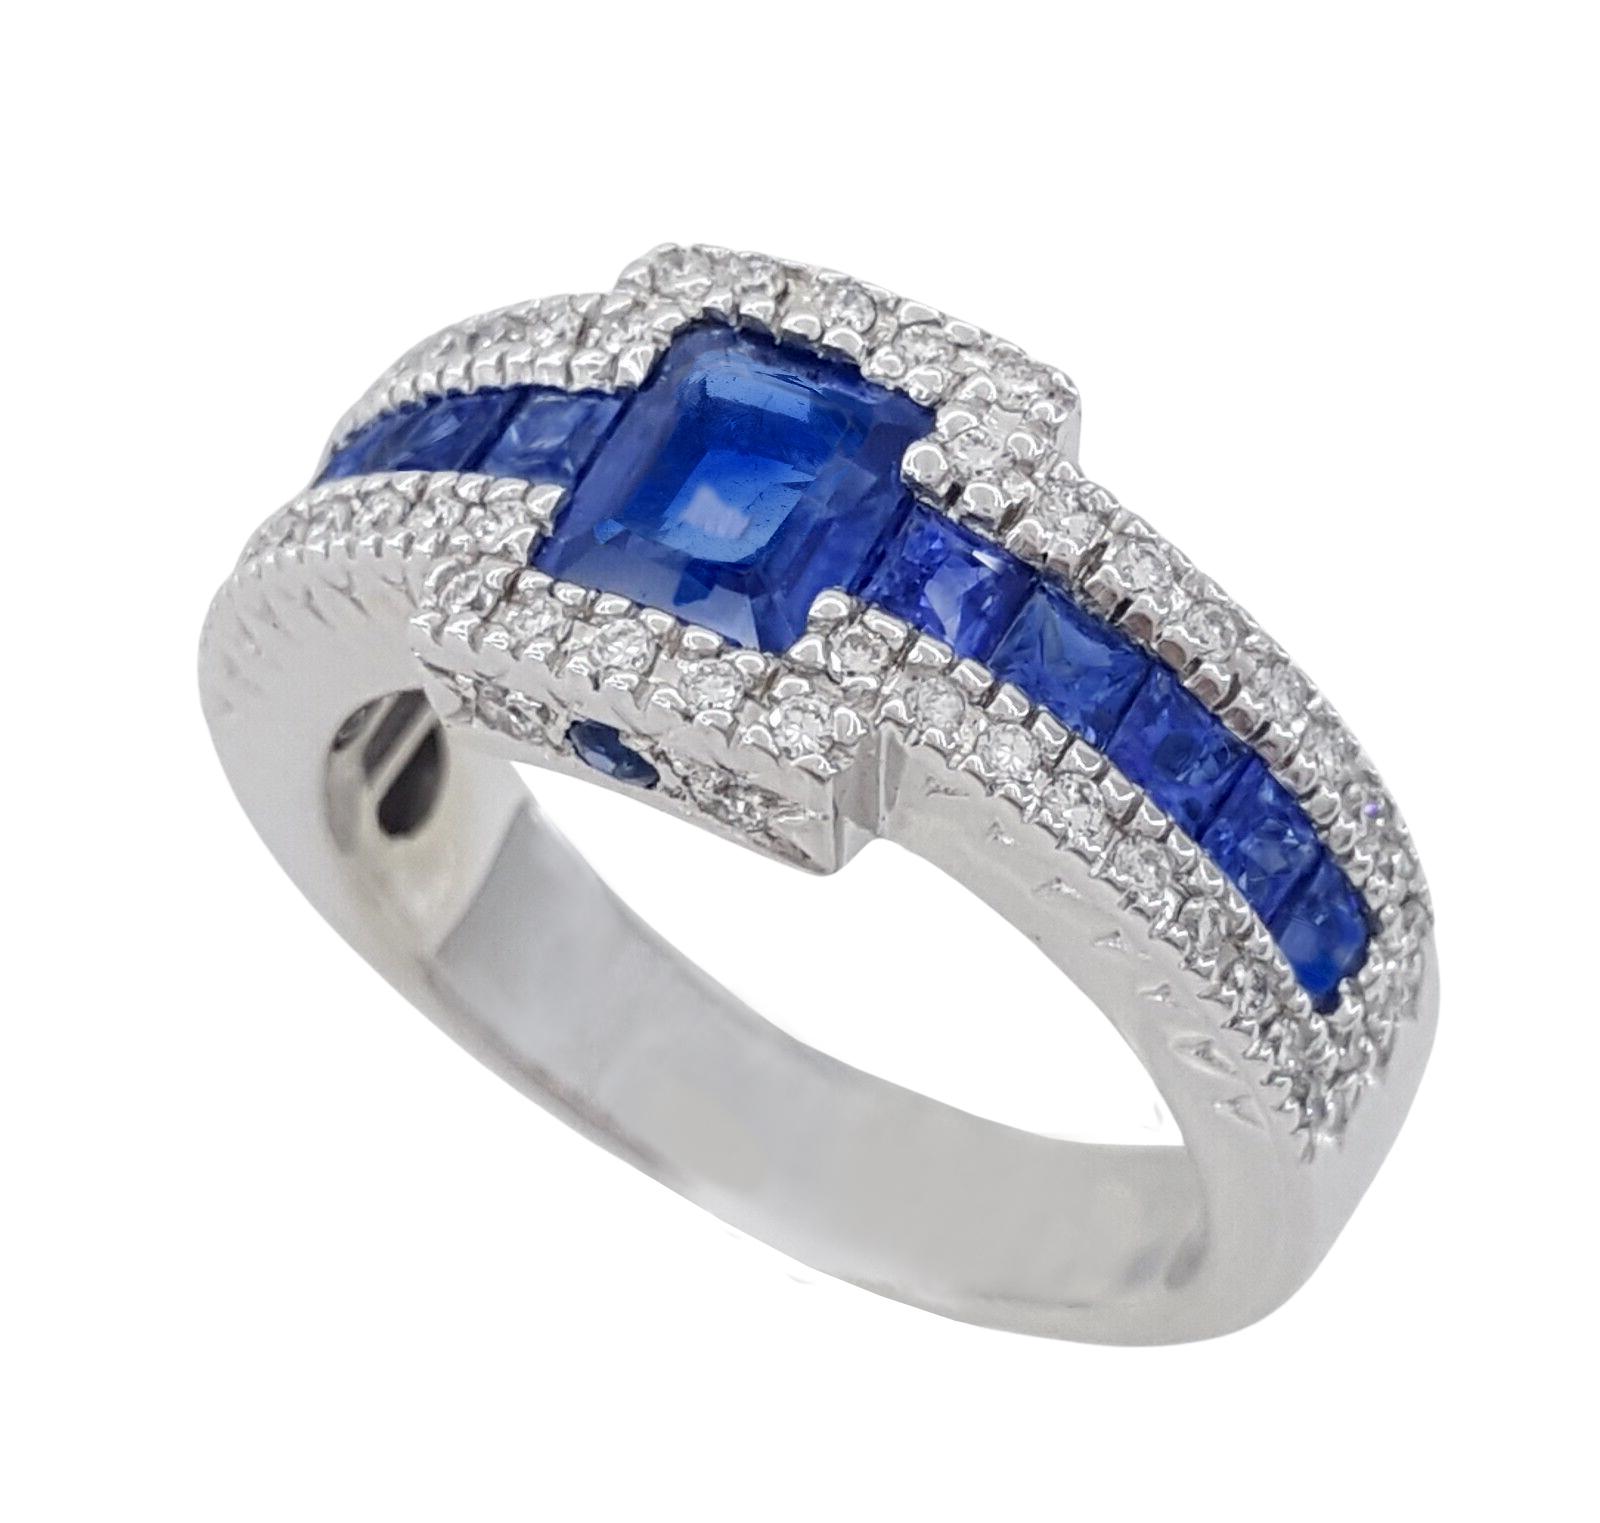 2.45 ct Total Weight Natural Blue Sapphire & Round Diamond Ring in 18K White Gold.



The ring weighs 8.2 grams, size 7, the center is a Natural Vivid Blue Color Emerald Cut Sapphire weighing approximately 1.1 ct.



there are 10 Natural Princess &